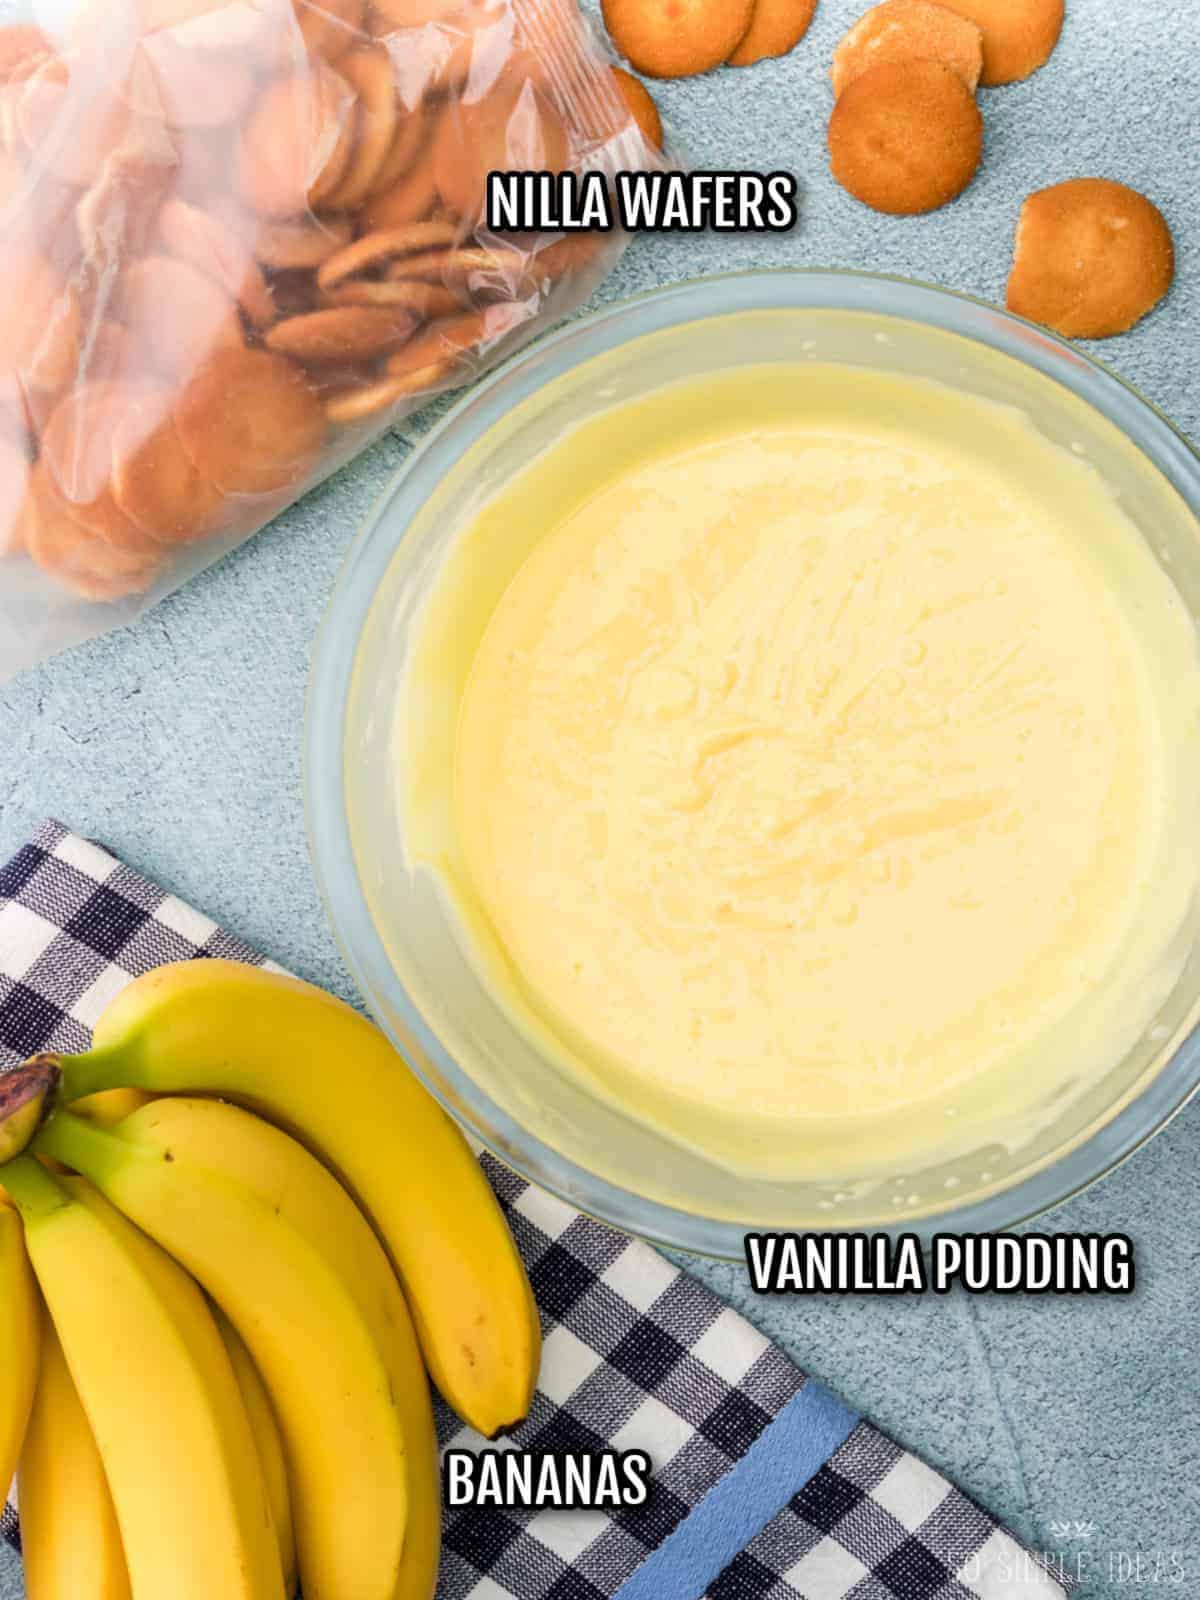 3 ingredients for banana pudding.